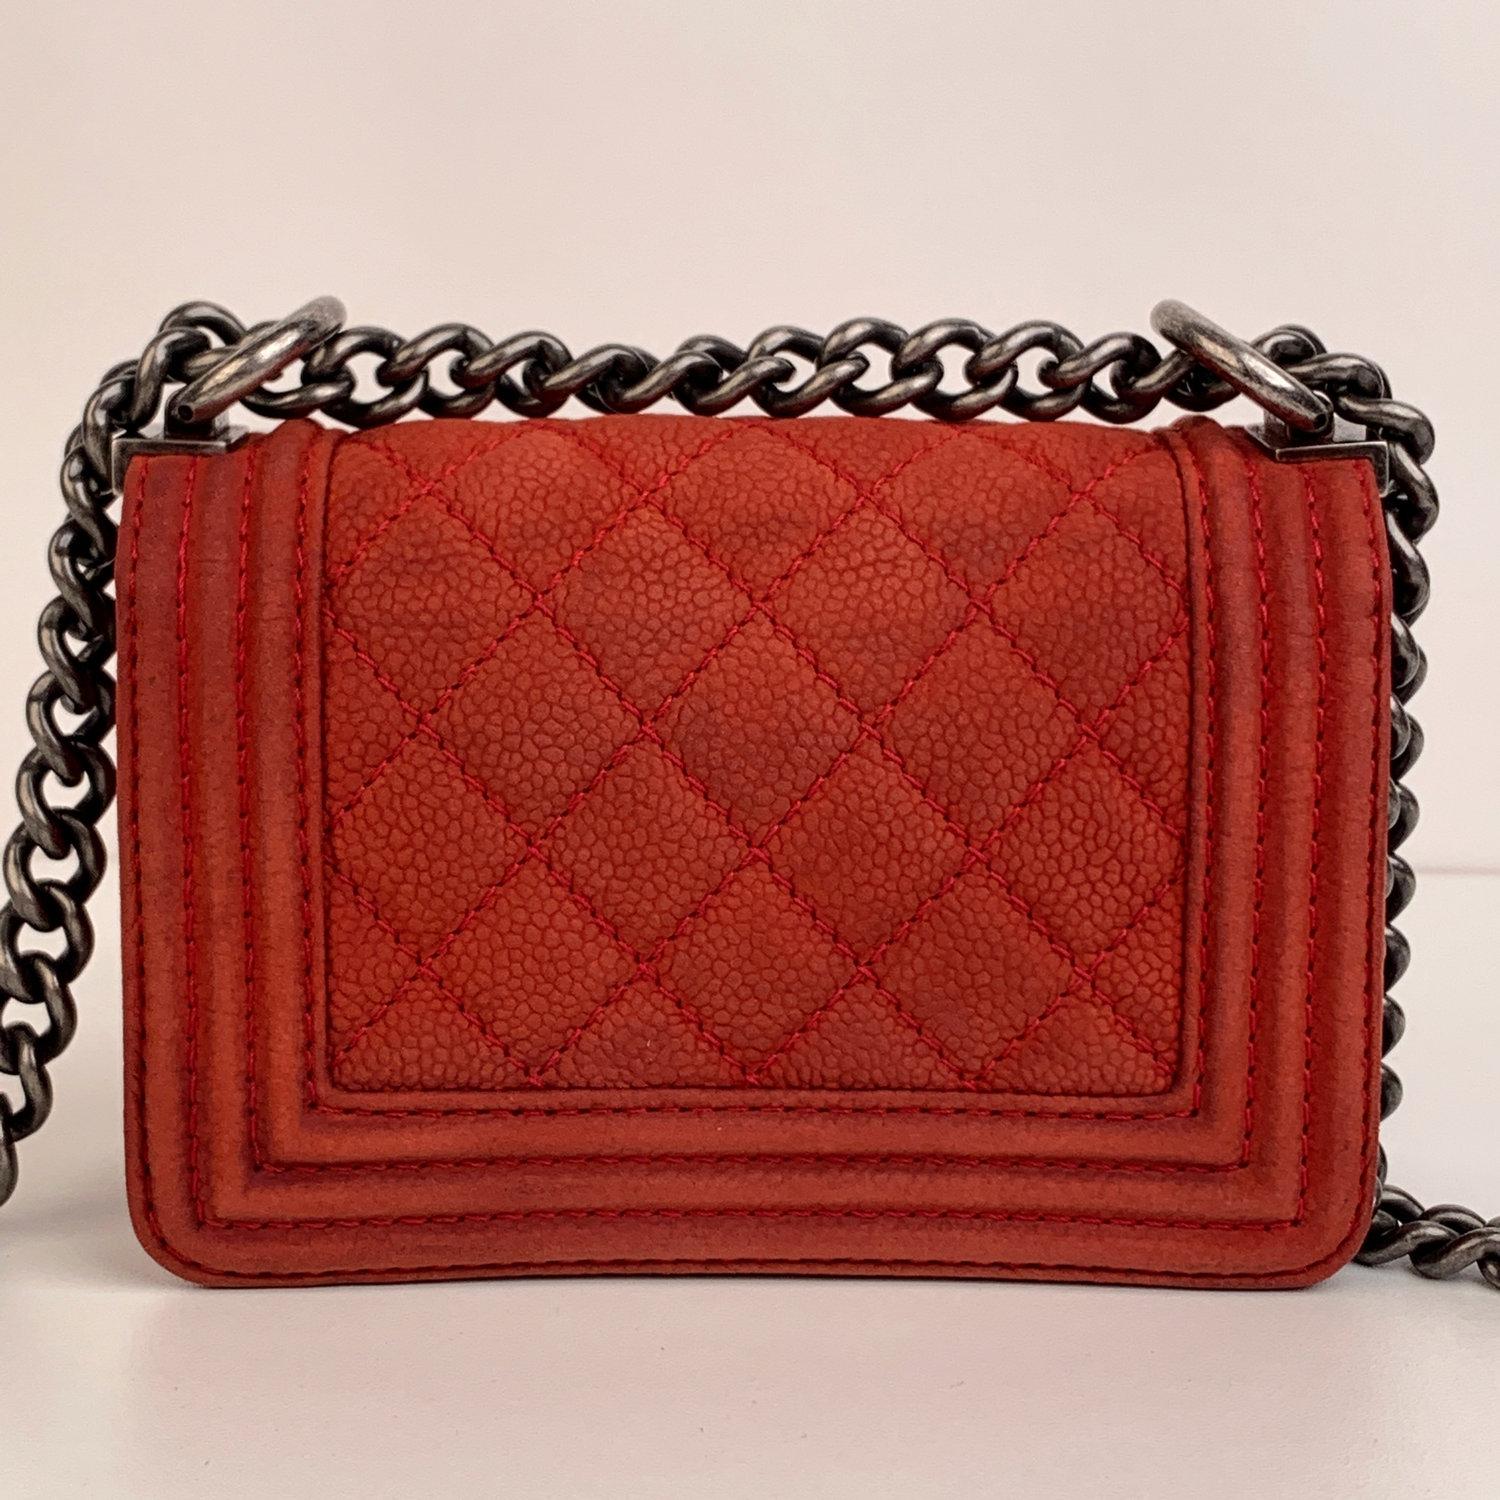 Chanel Red Quilted Caviar Leather Mini Boy Shoulder Bag 2